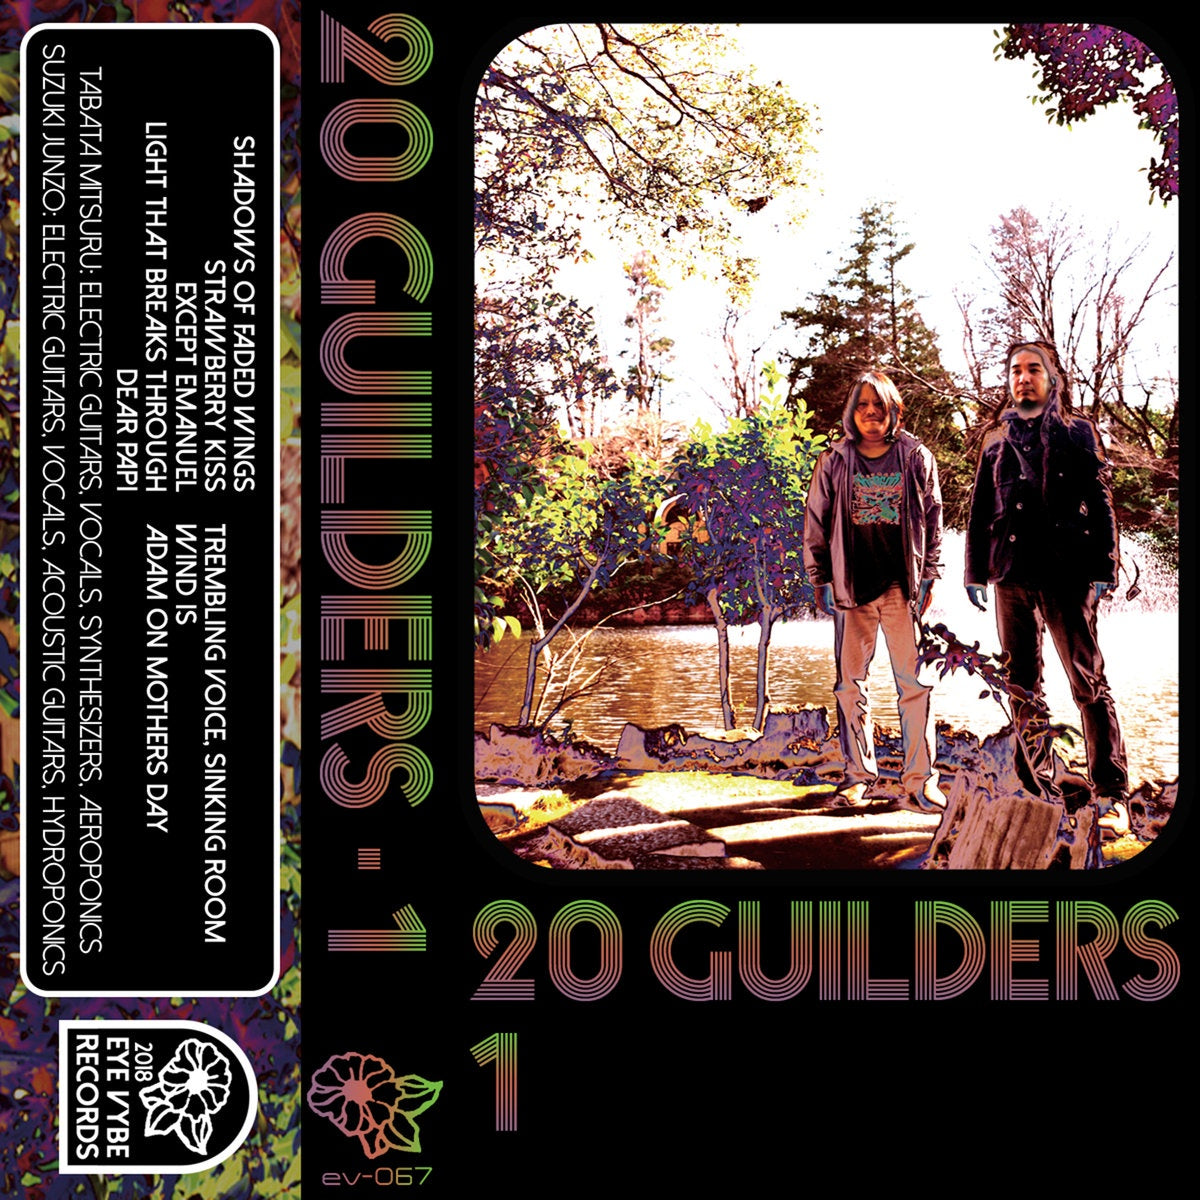 20 Guilders - 1 - New Cassette 2018 Eye Vybe Limited Edition Gold Tape - Experimental / Avant Garde / Psychedelic / Space Rock